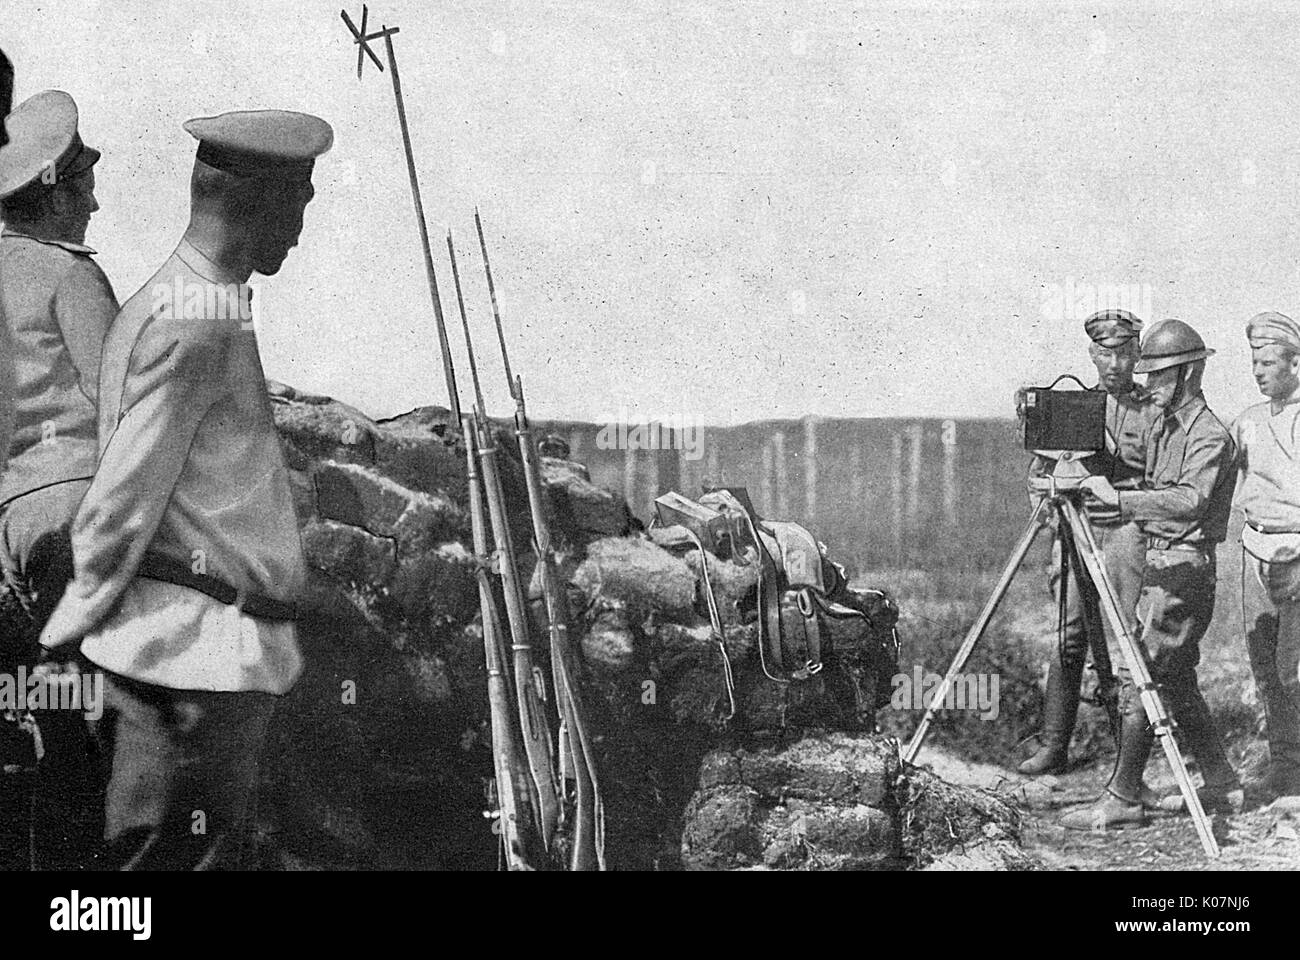 Russian soldiers on the eastern front, Russia, during the First World War. The cross shape on top of a stick is a wind gauge, designed to show whether the wind was in the right direction for a potential gas attack from the German lines. The man on the right with a camera on a tripod is probably Donald C Thompson (1885-1947).      Date: circa 1917 Stock Photo